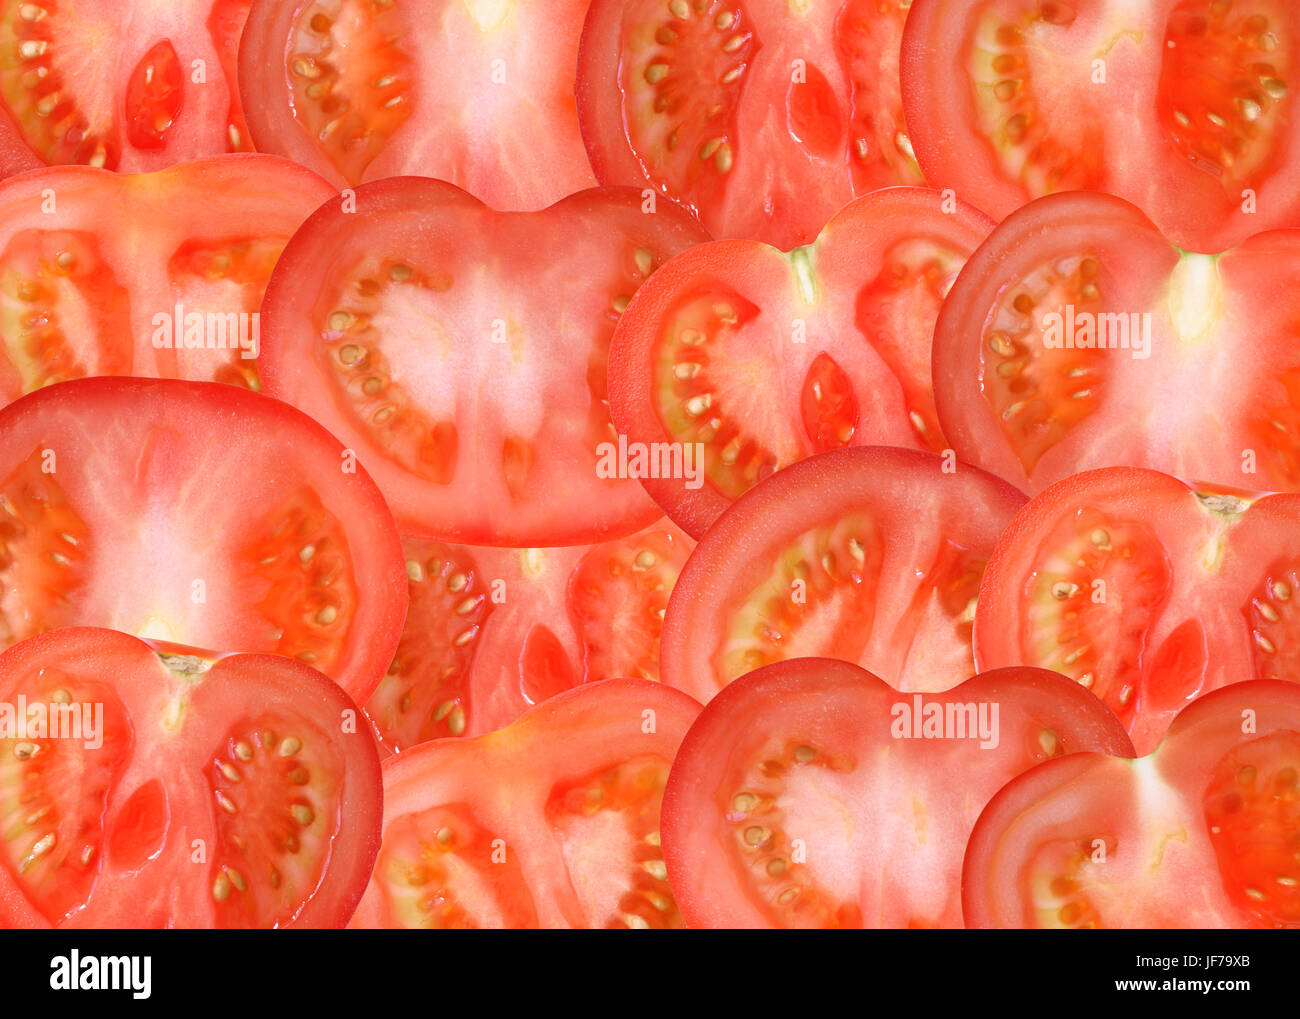 Background made from lot of freshness red sliced tomatoes Stock Photo